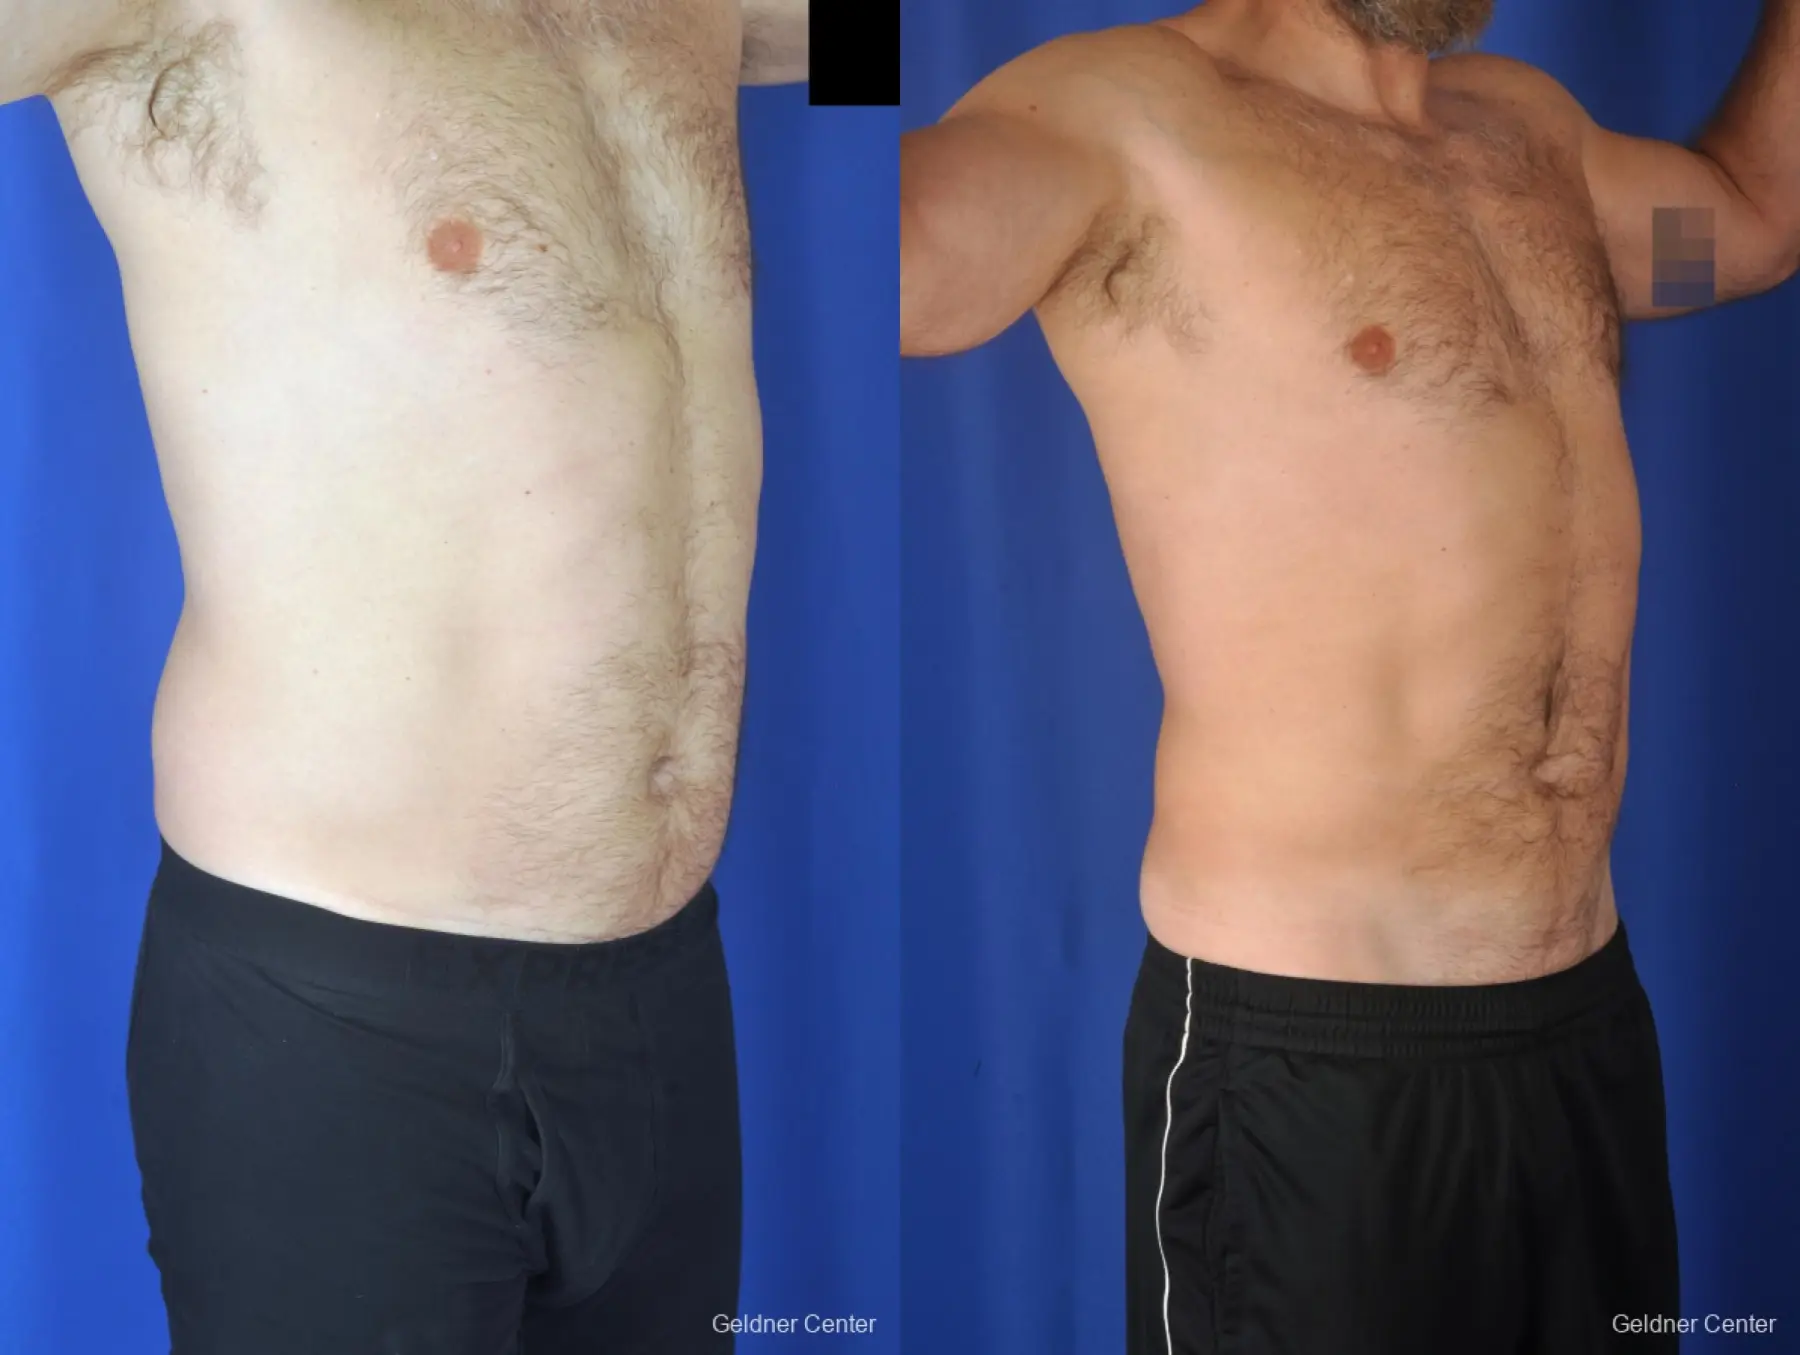 Liposuction For Men: Patient 7 - Before and After 2